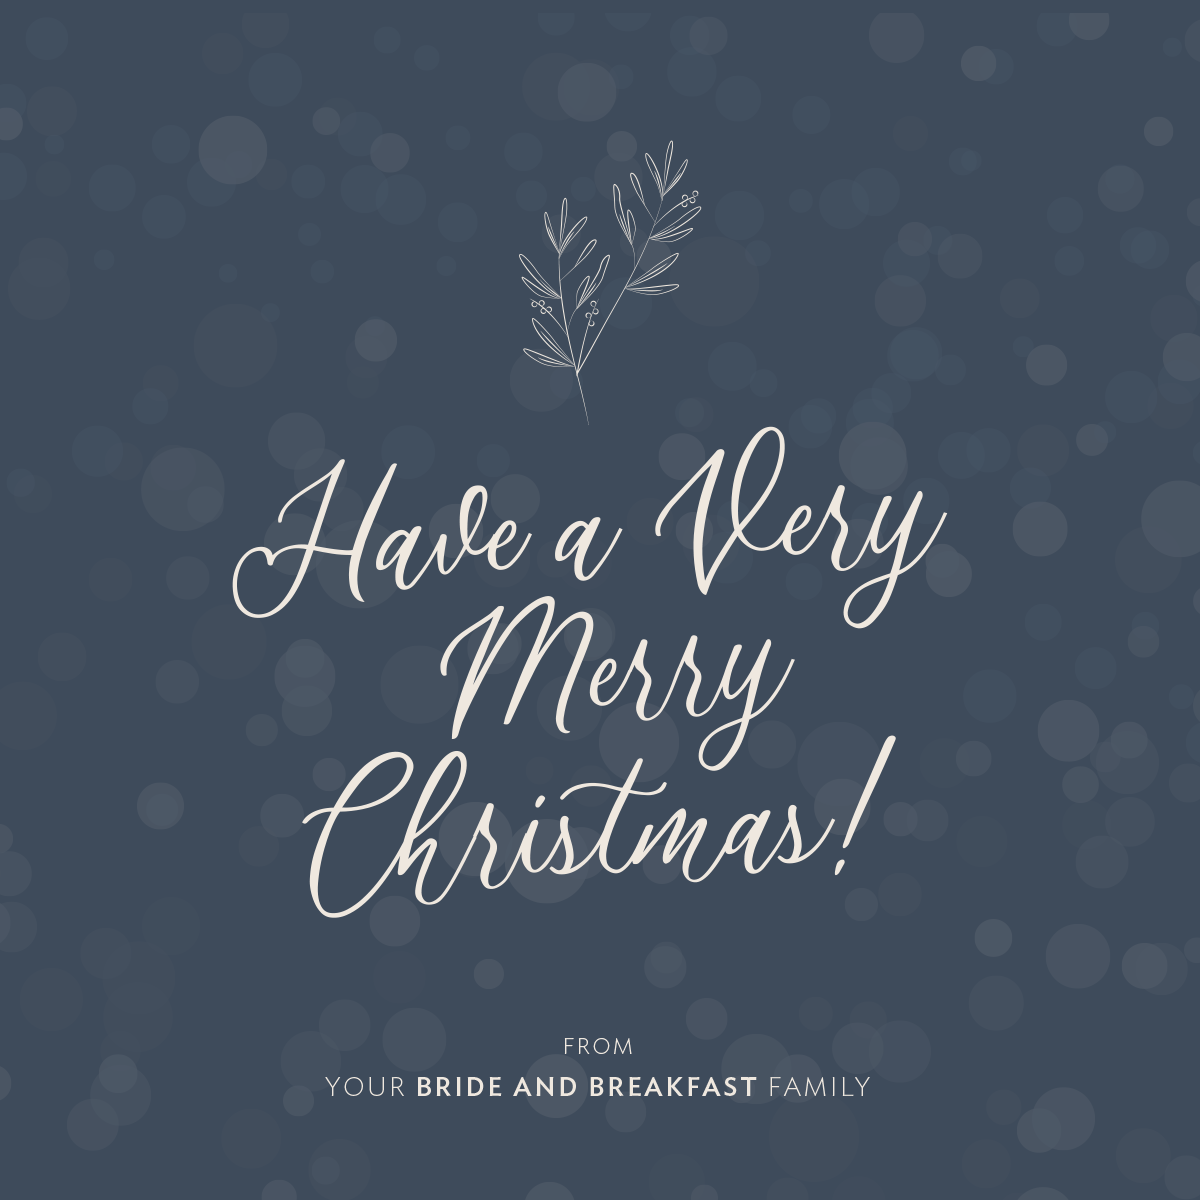 Have a very Merry Christmas! From your Bride and Breakfast Family!